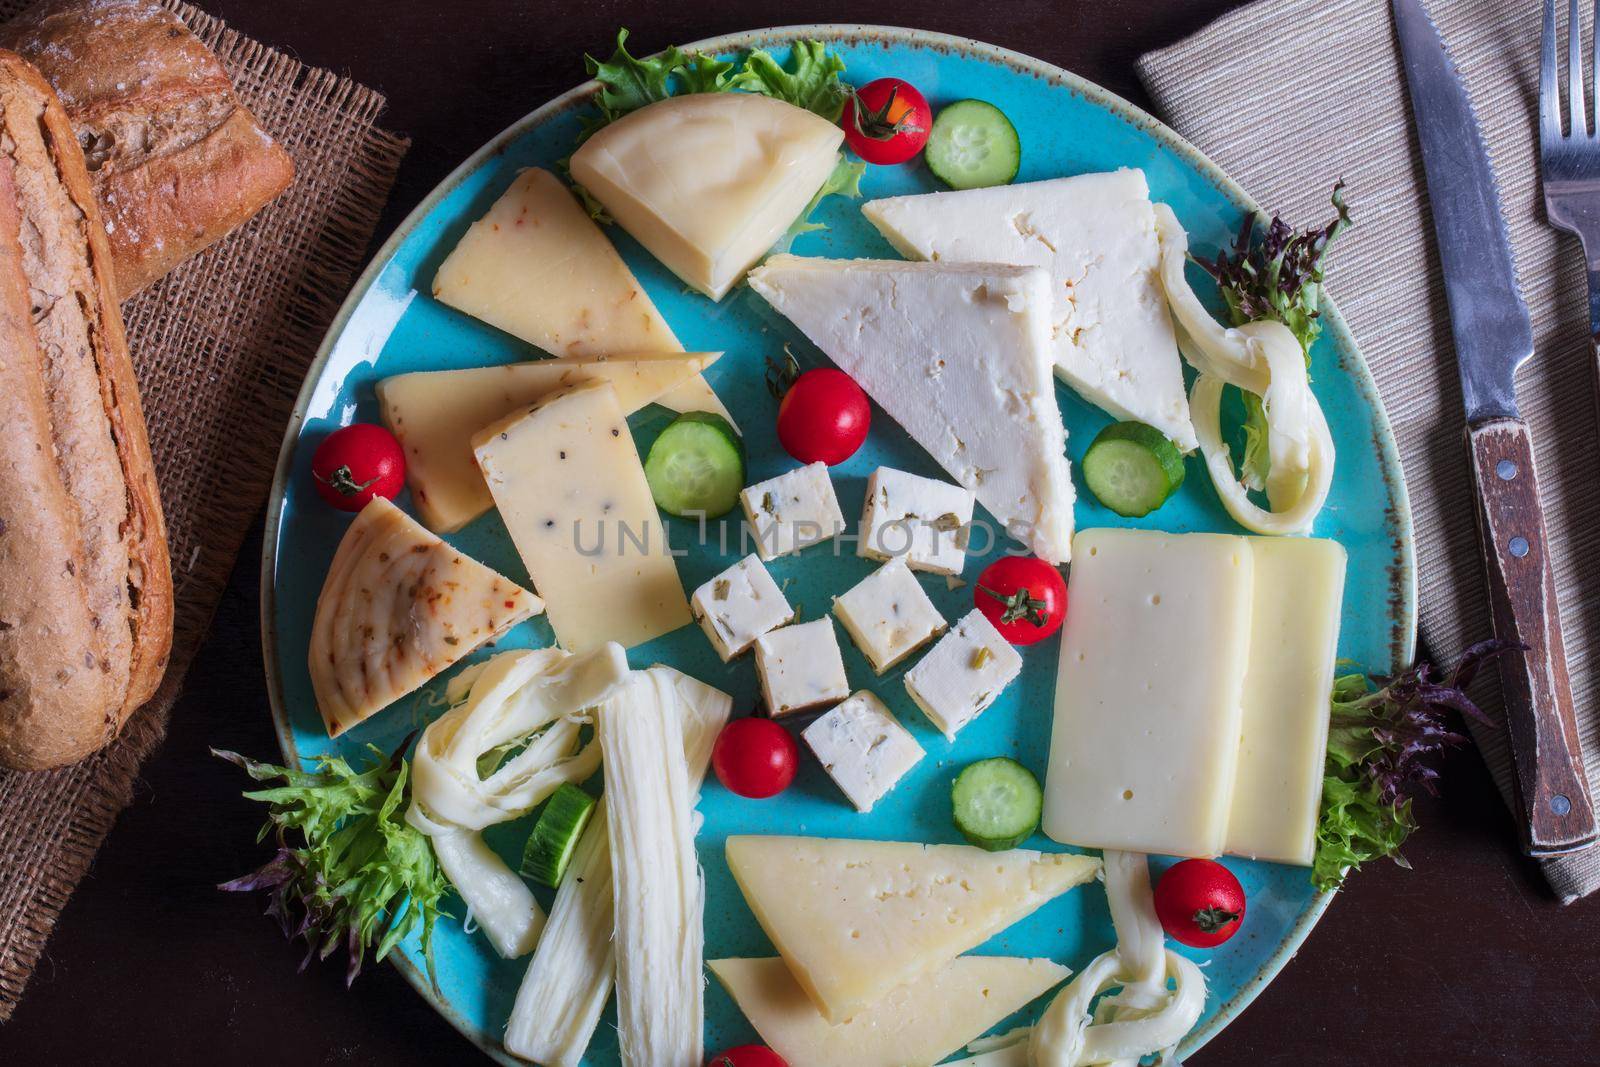 Cheese plate on a dark table. Many kinds of cheese on a plate. High quality photo